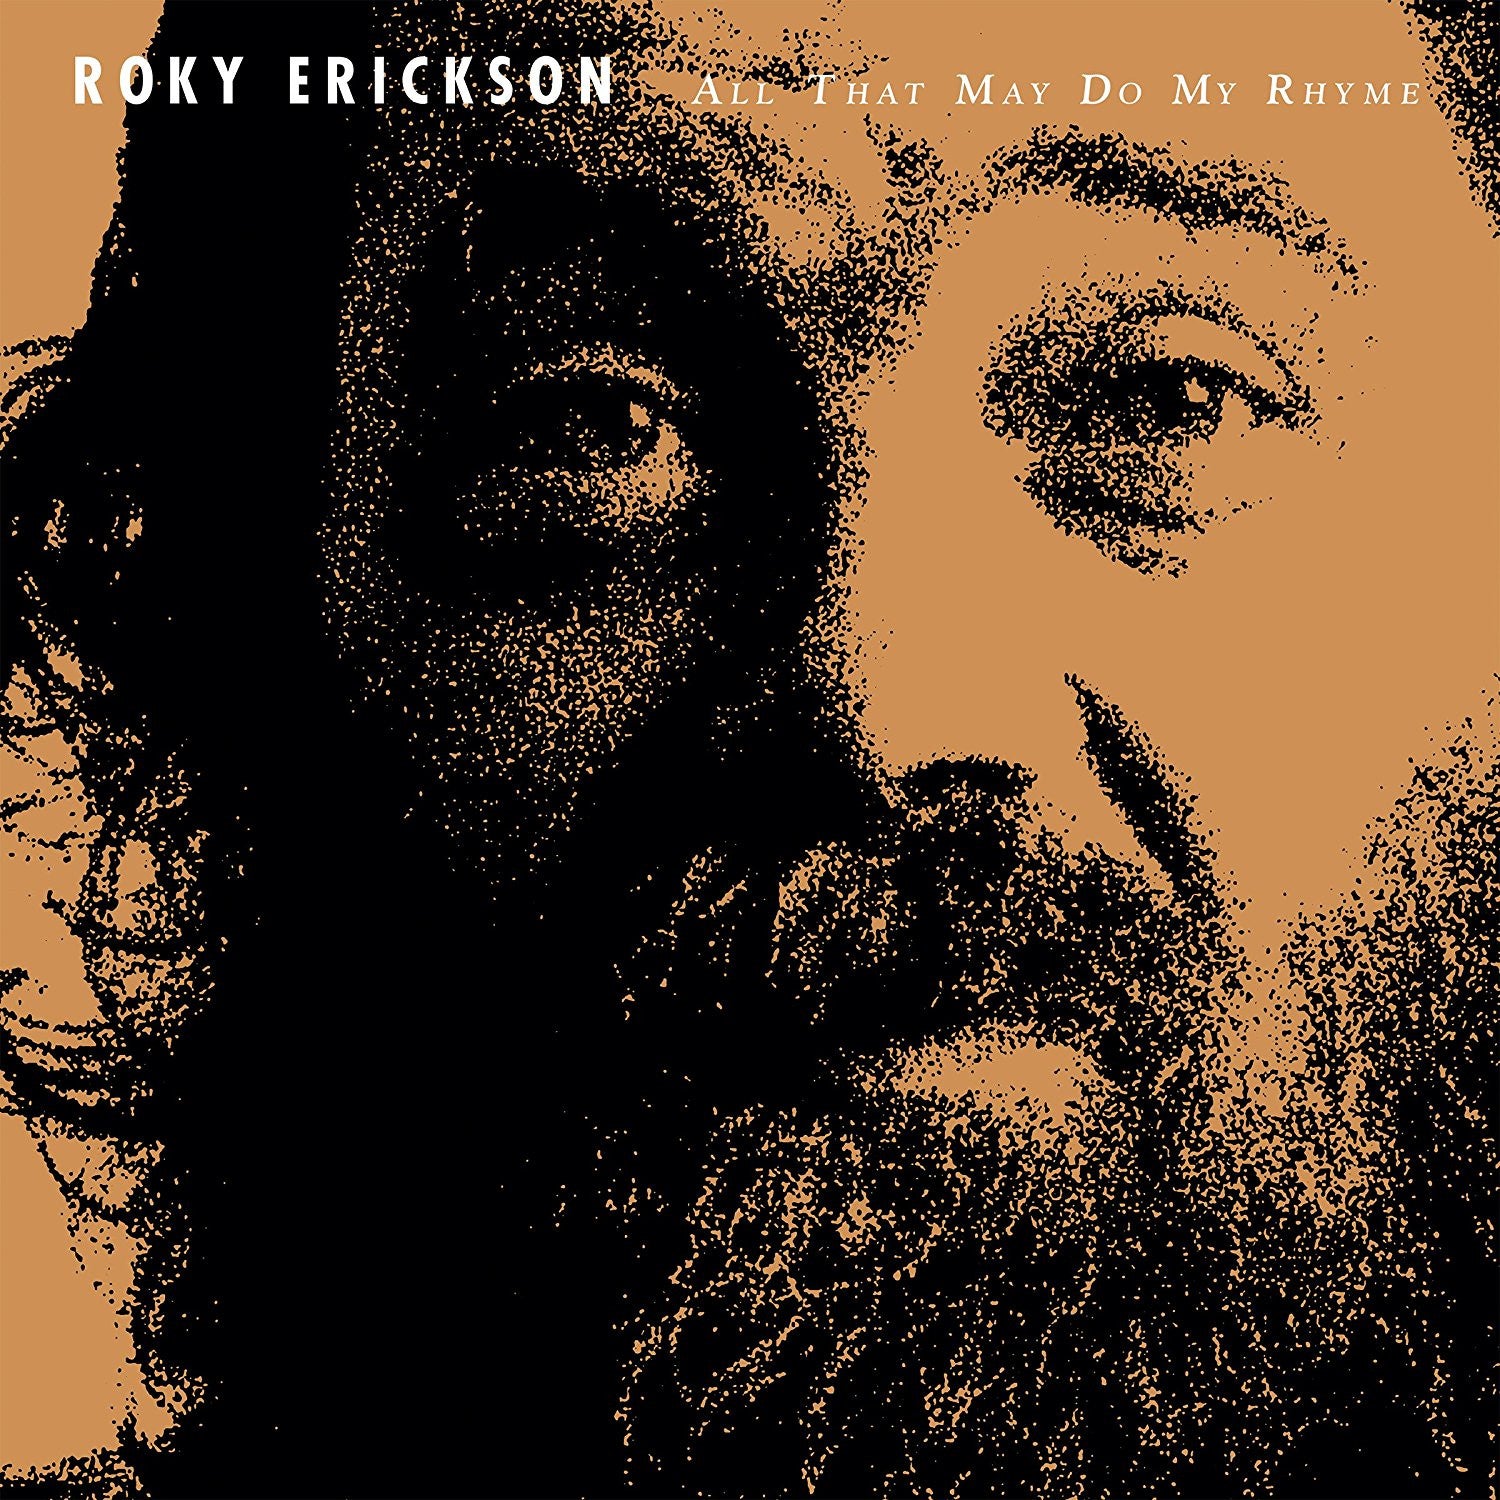 Roky Erickson - All That May Do My Rhyme LP